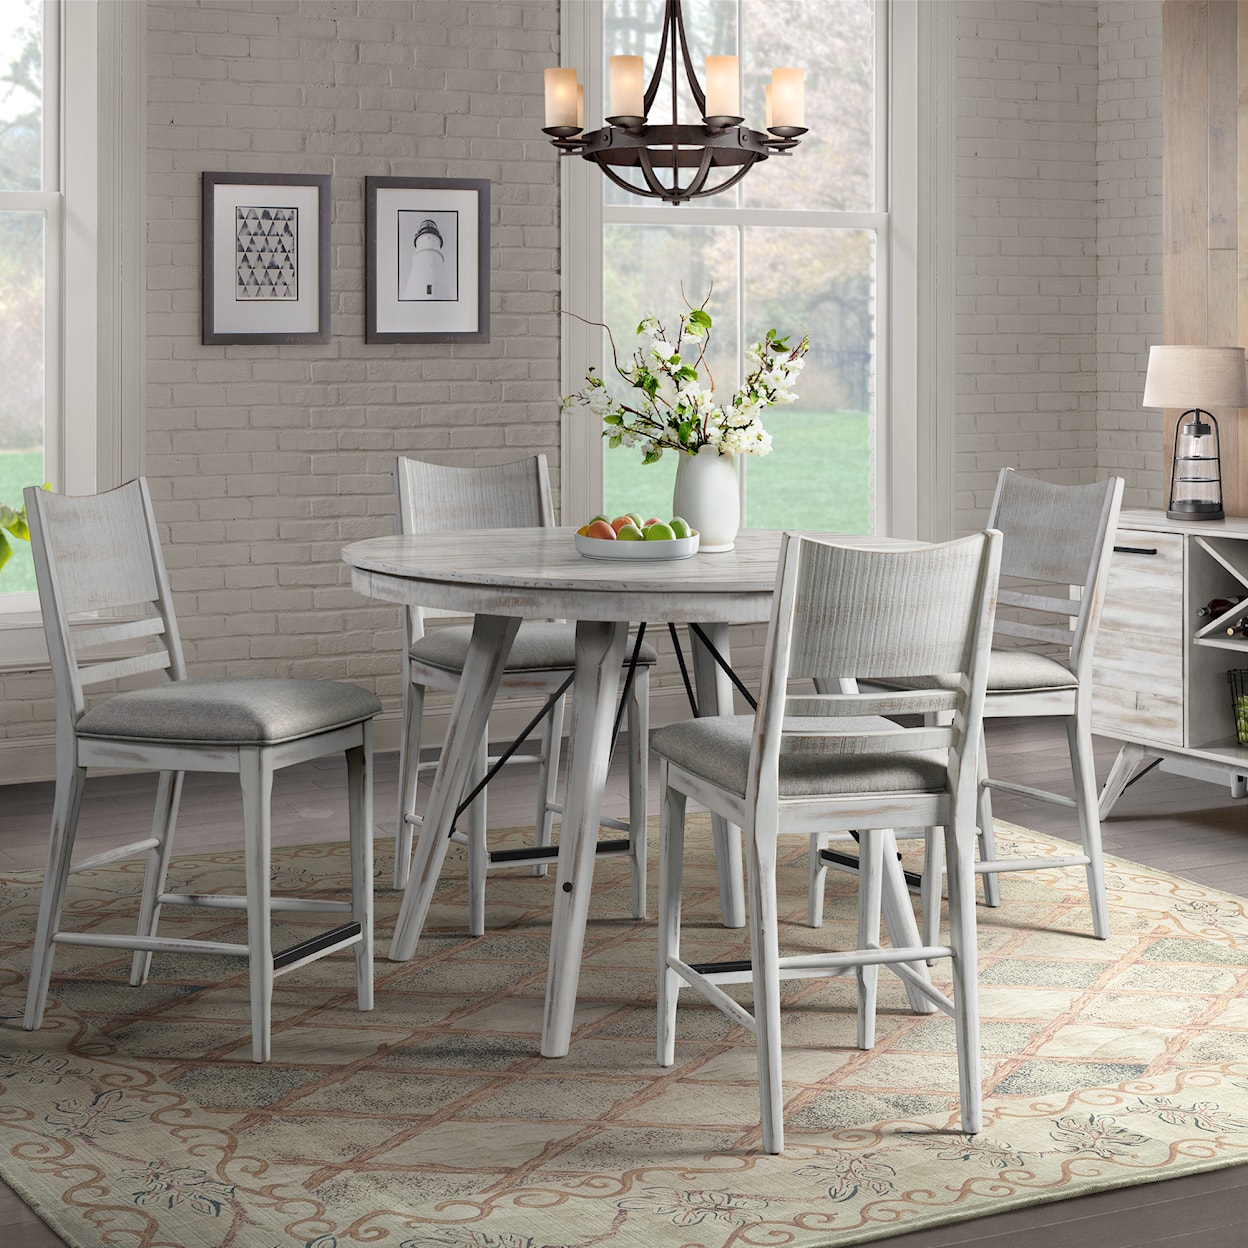 Intercon Modern Rustic Table and Chair Set